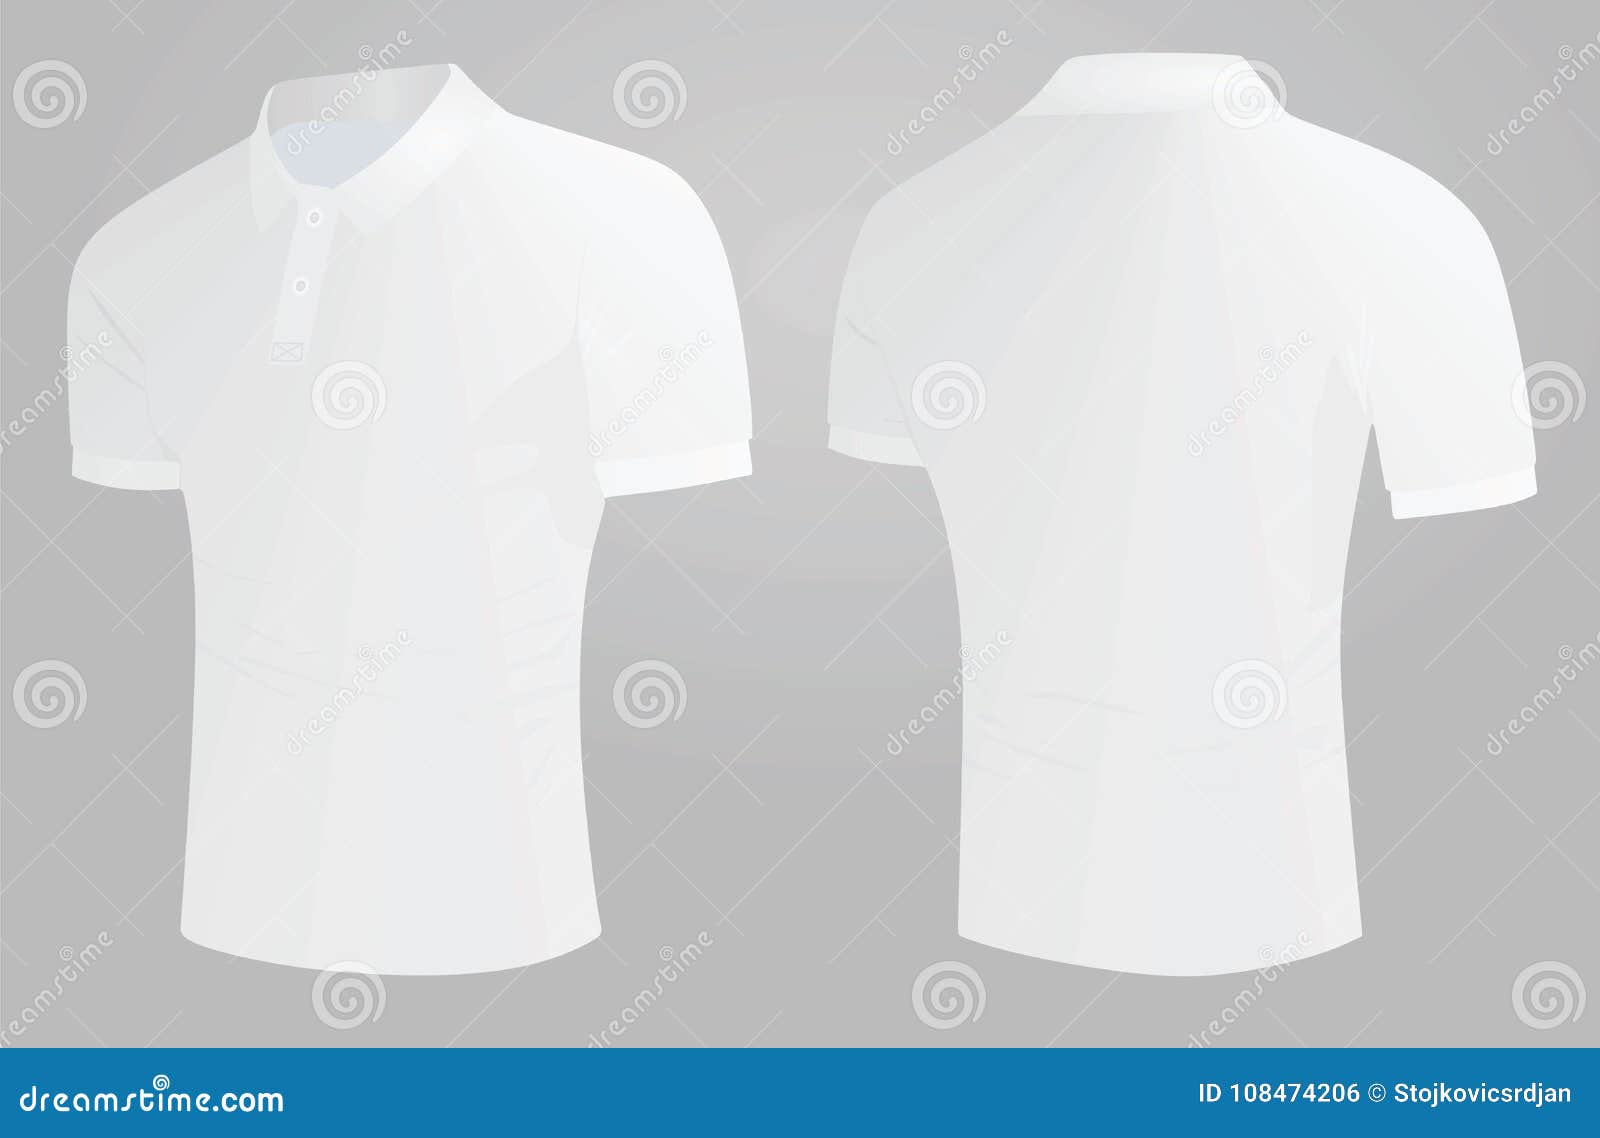 Polo t shirt. side view stock vector 